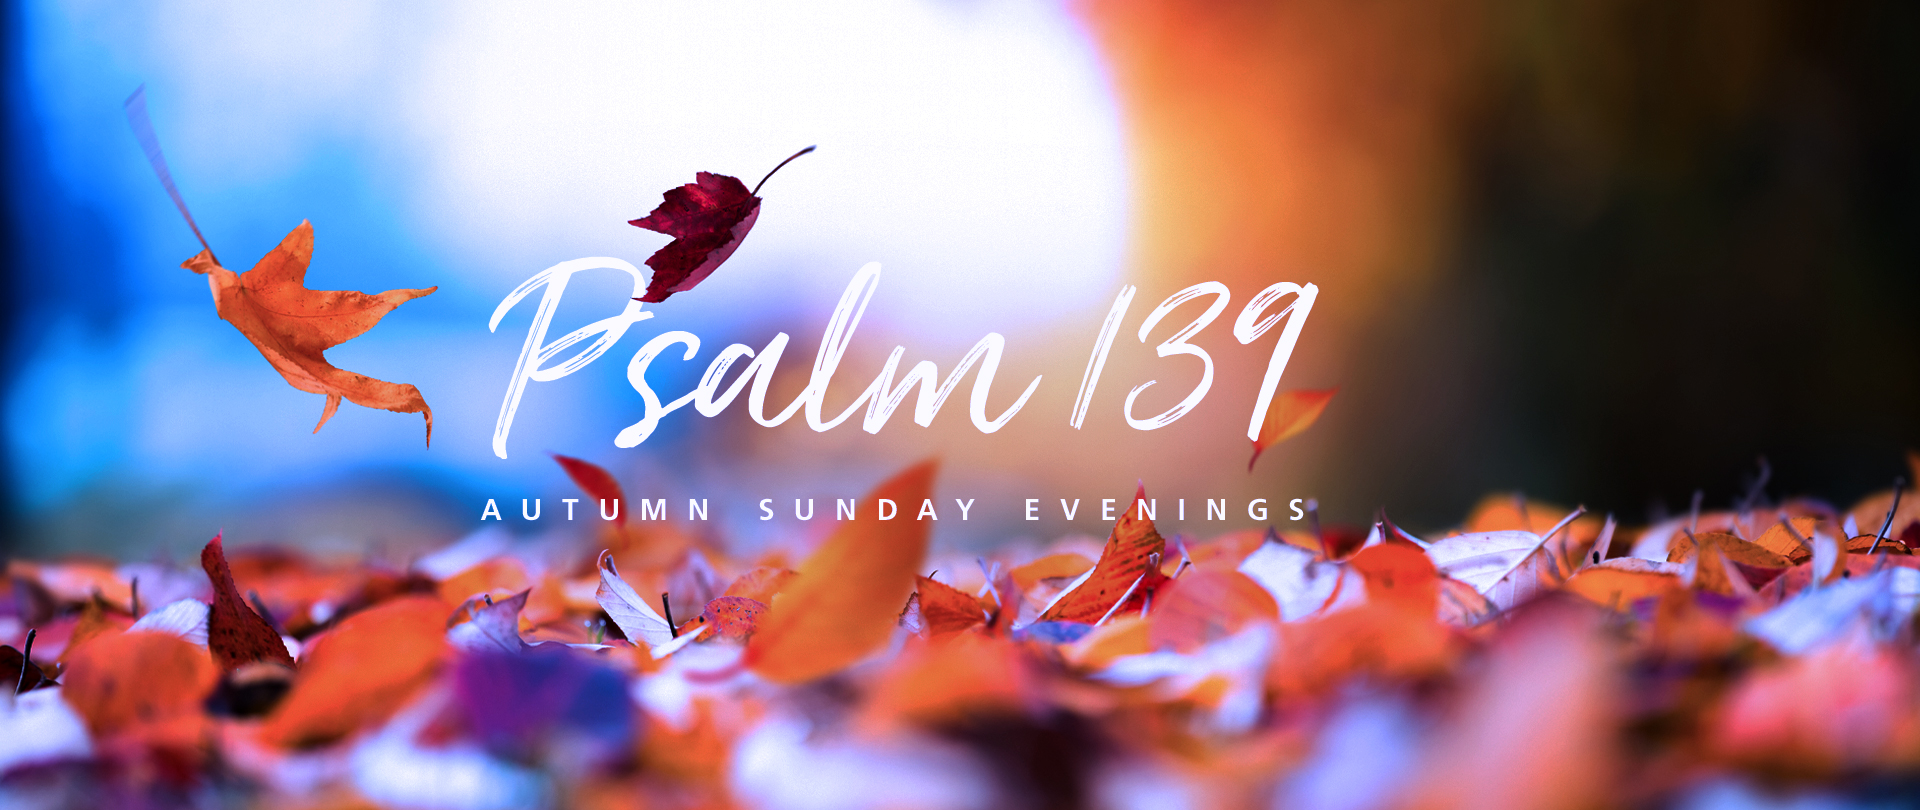 Psalm 139
Selected Sundays at 6:00 PM
Join us on November 19
